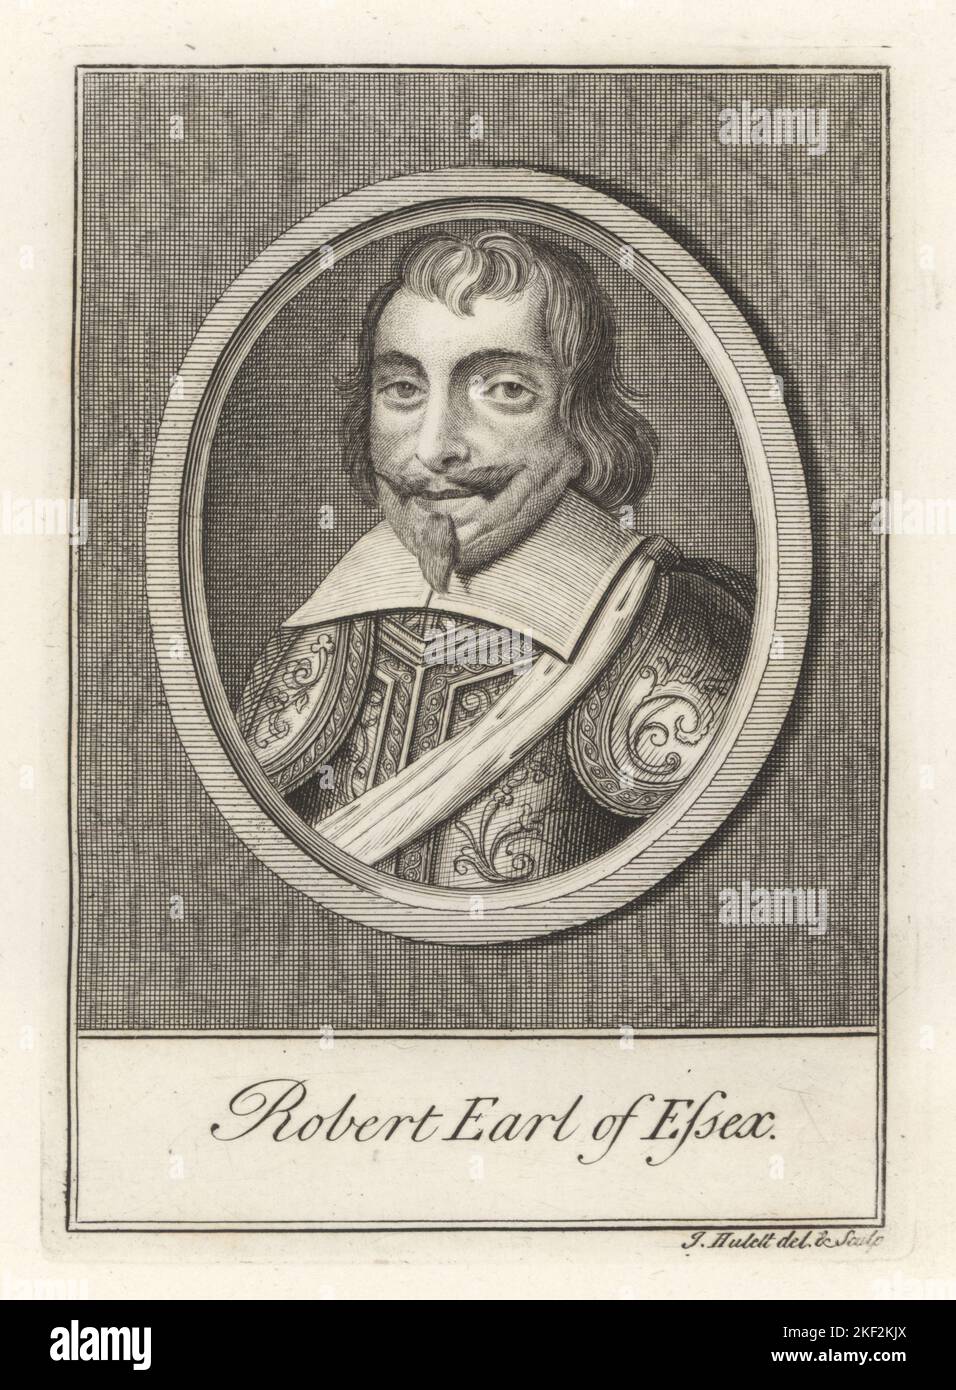 Robert Devereux, 3rd Earl of Essex, Parliamentary general, 1591-1646. Bareheaded with goatee beard, engraved breastplate and shoulder armour, collar and sash. Drawn and engraved by James Hulett. Copperplate engraving from Samuel Woodburn’s Gallery of Rare Portraits Consisting of Original Plates, George Jones, 102 St Martin’s Lane, London, 1816. Stock Photo